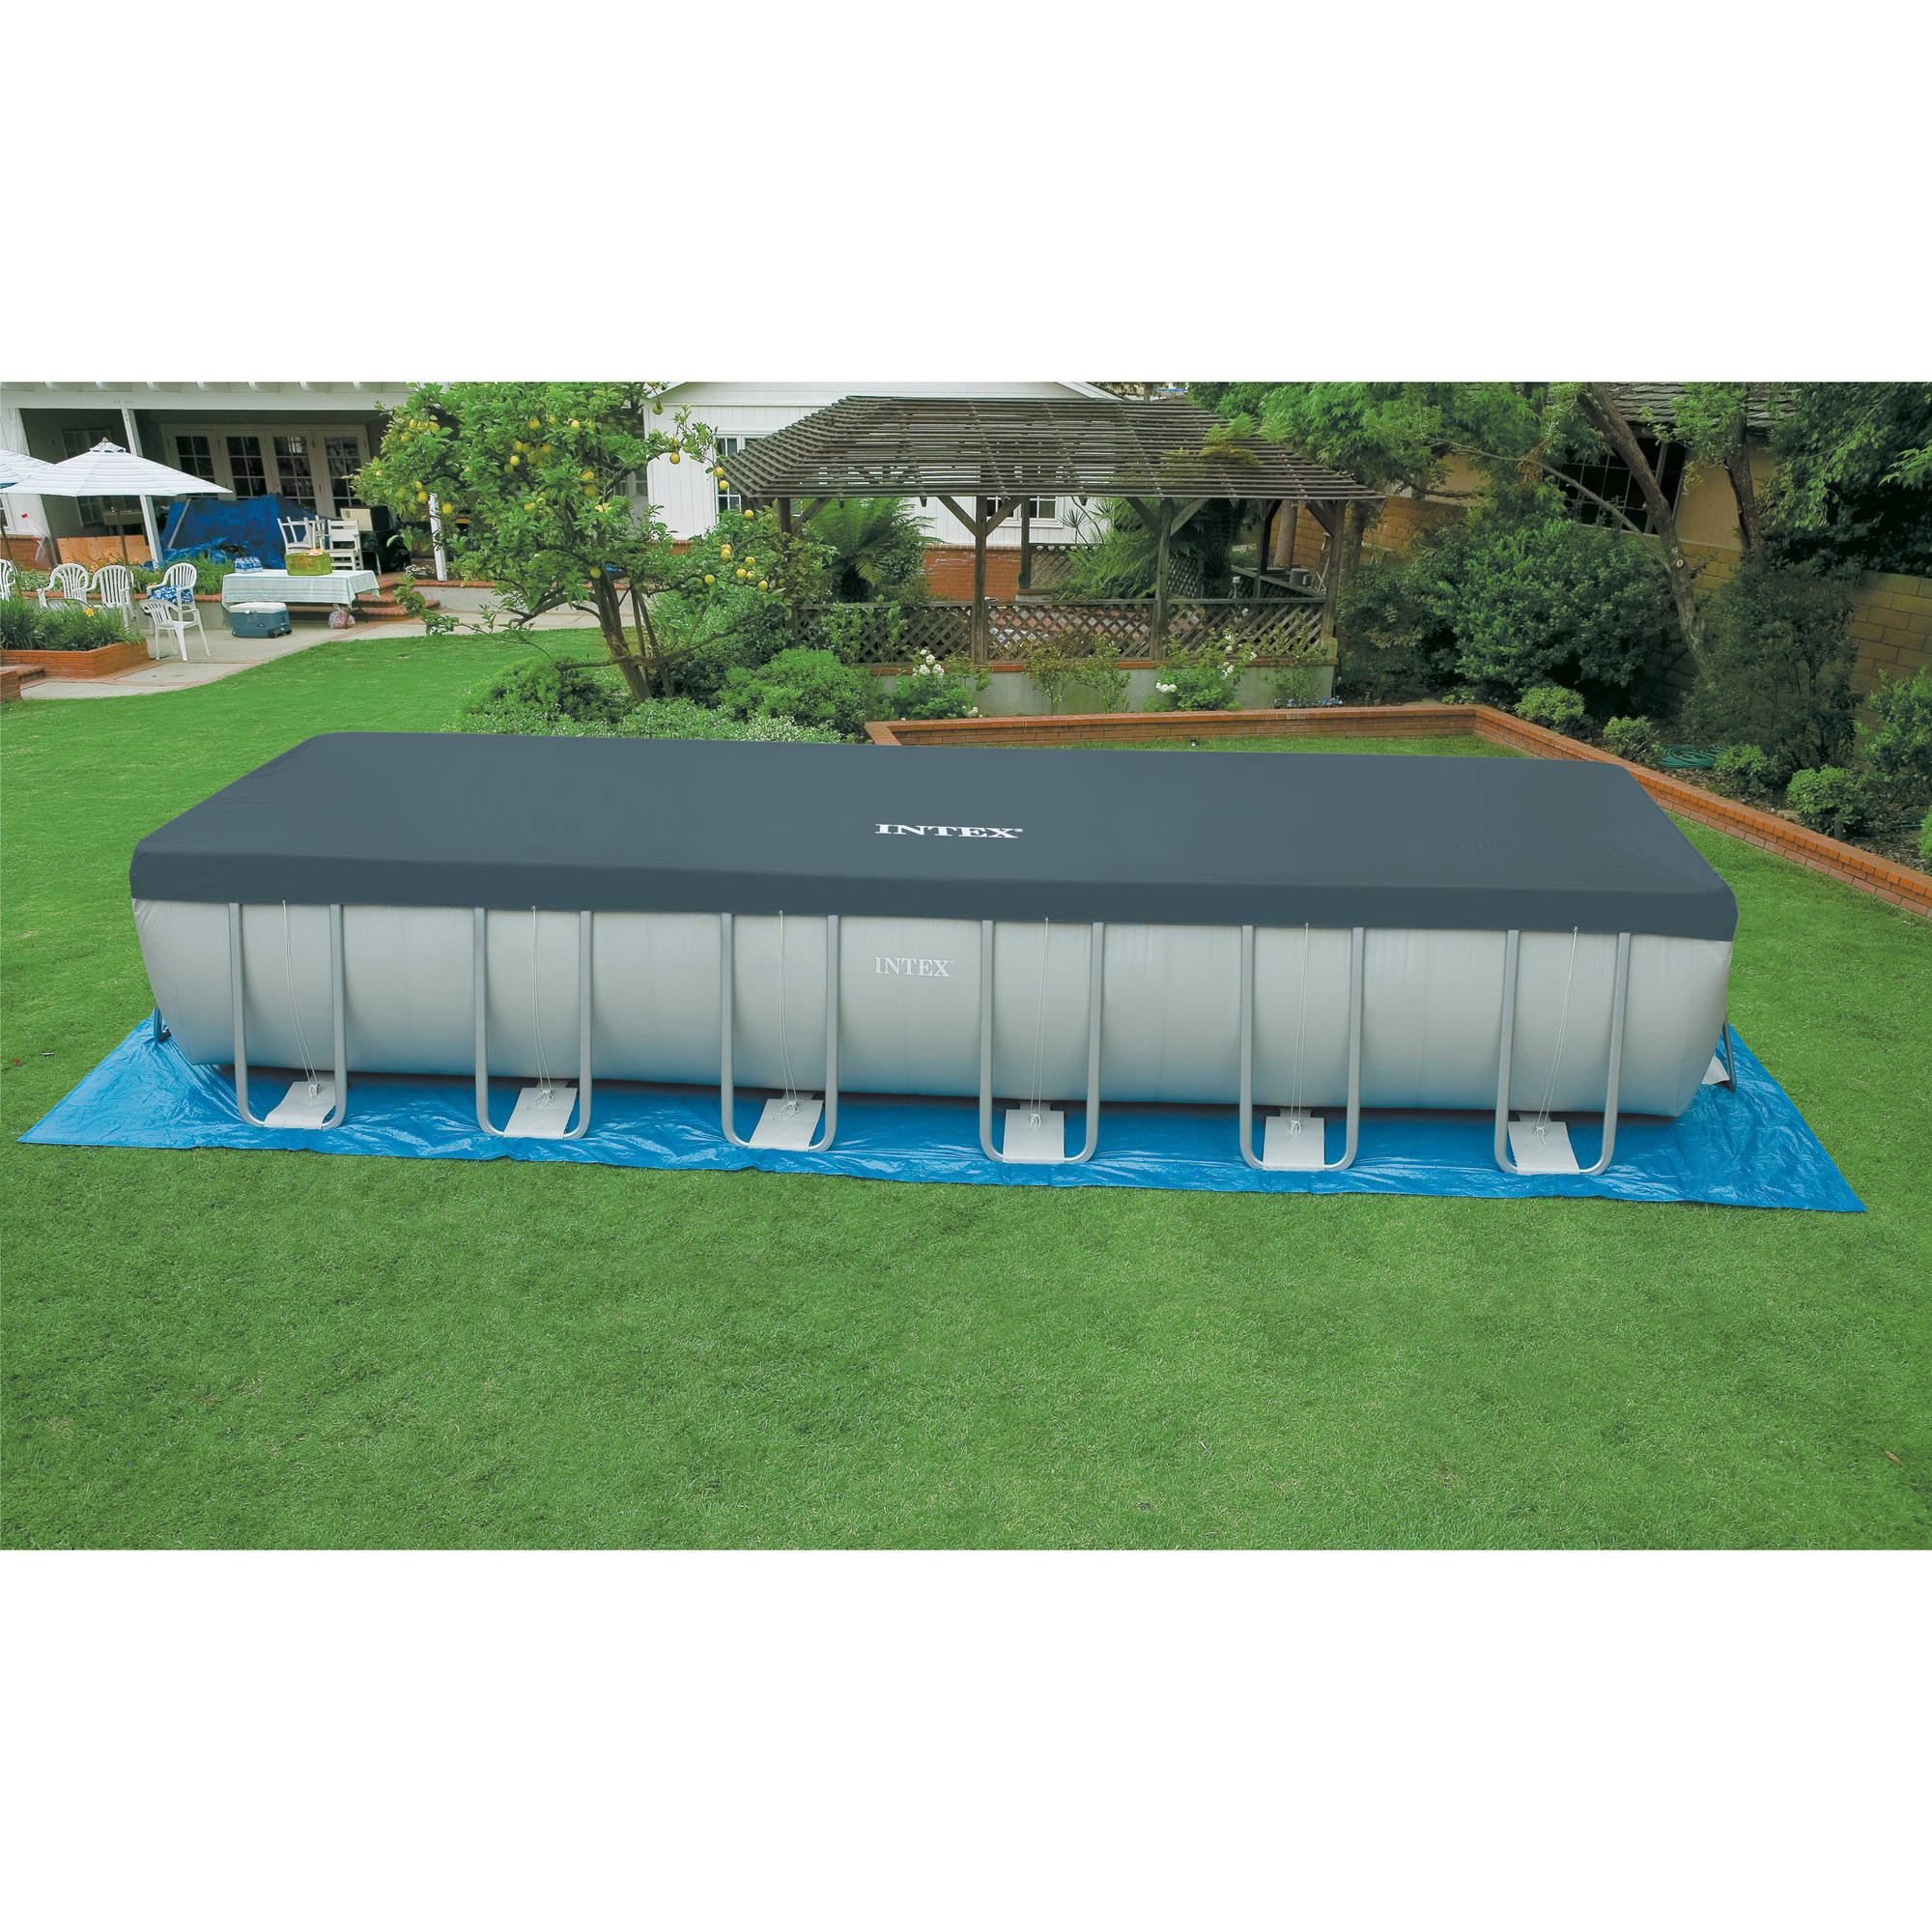 Intex 24' x 12' x 52" Ultra Frame Rectangular Above Ground Swimming Pool with Sand Filter Pump - image 5 of 6